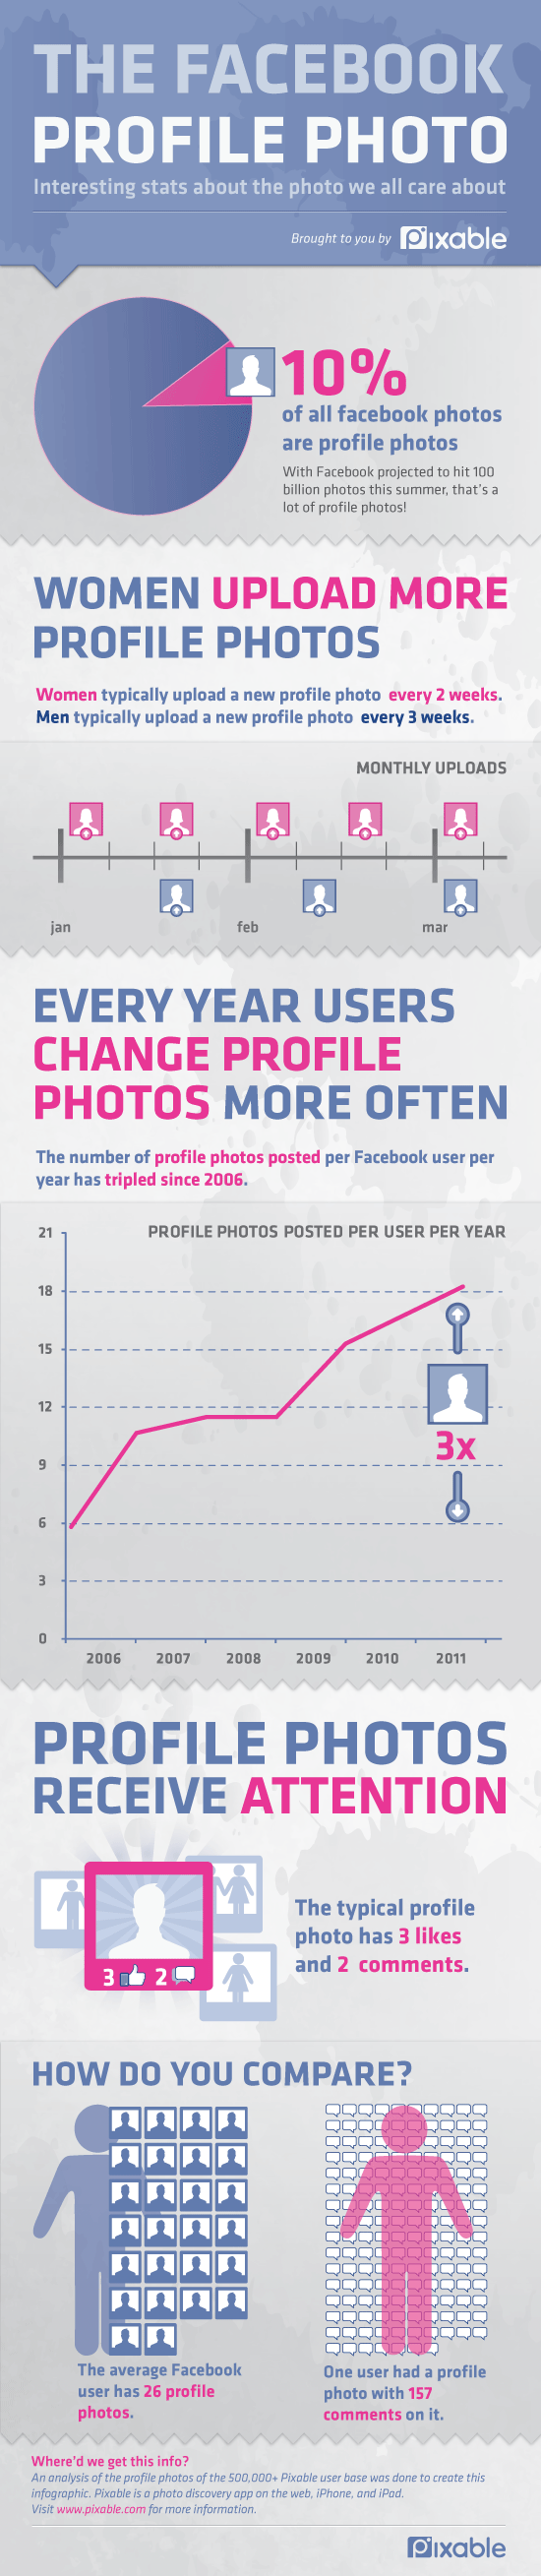 Facebook profile pictures infographic